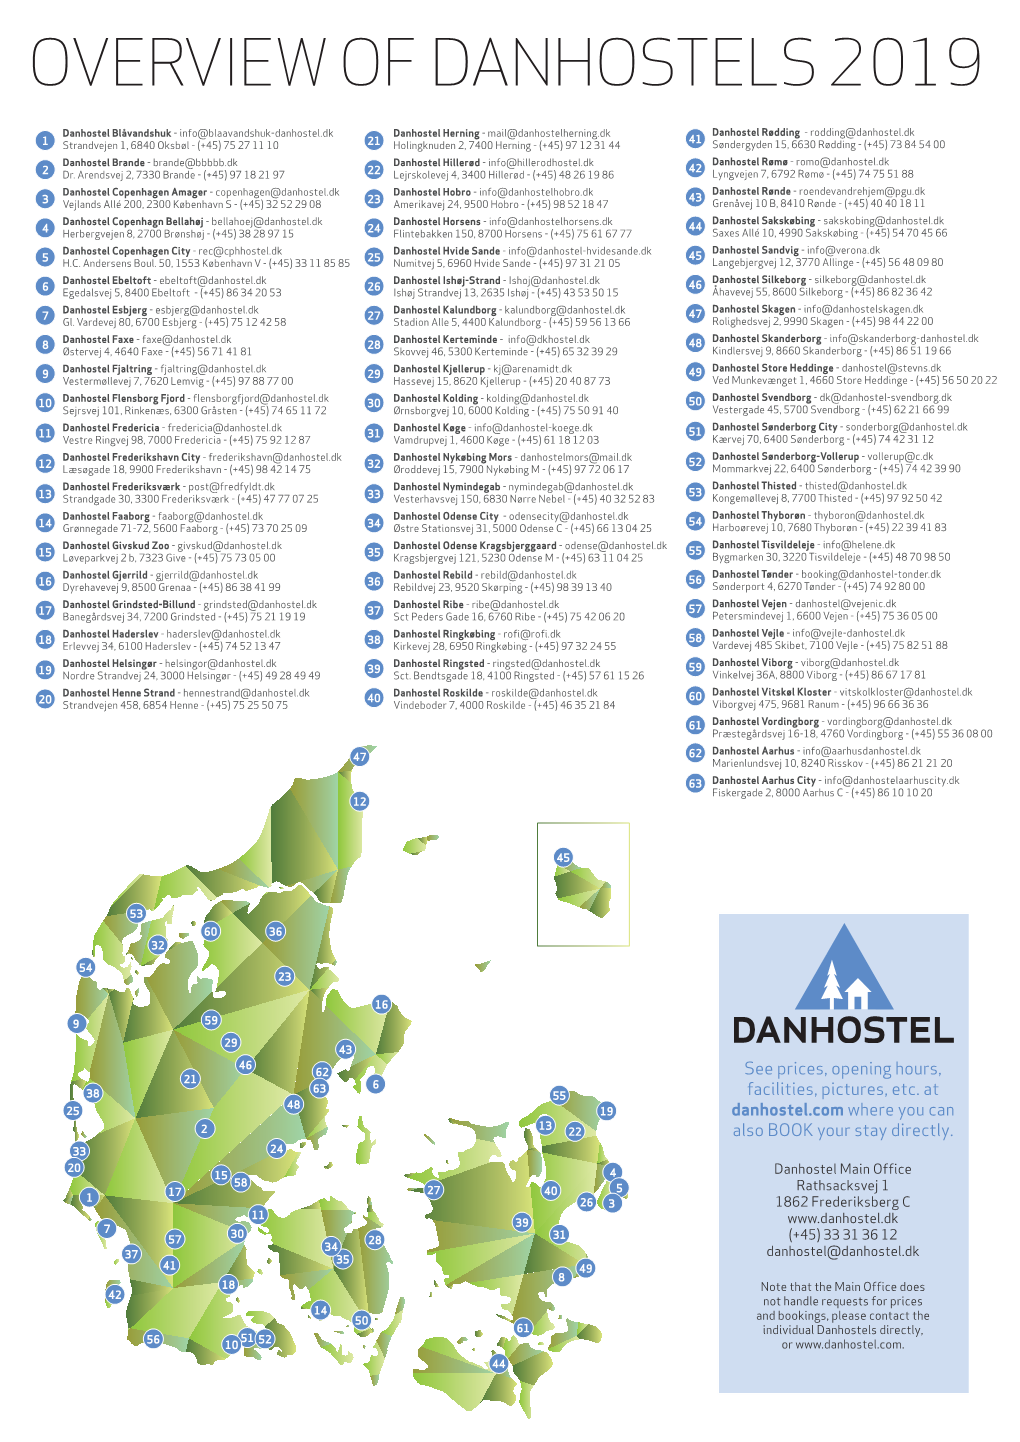 Overview of Danhostels 2019